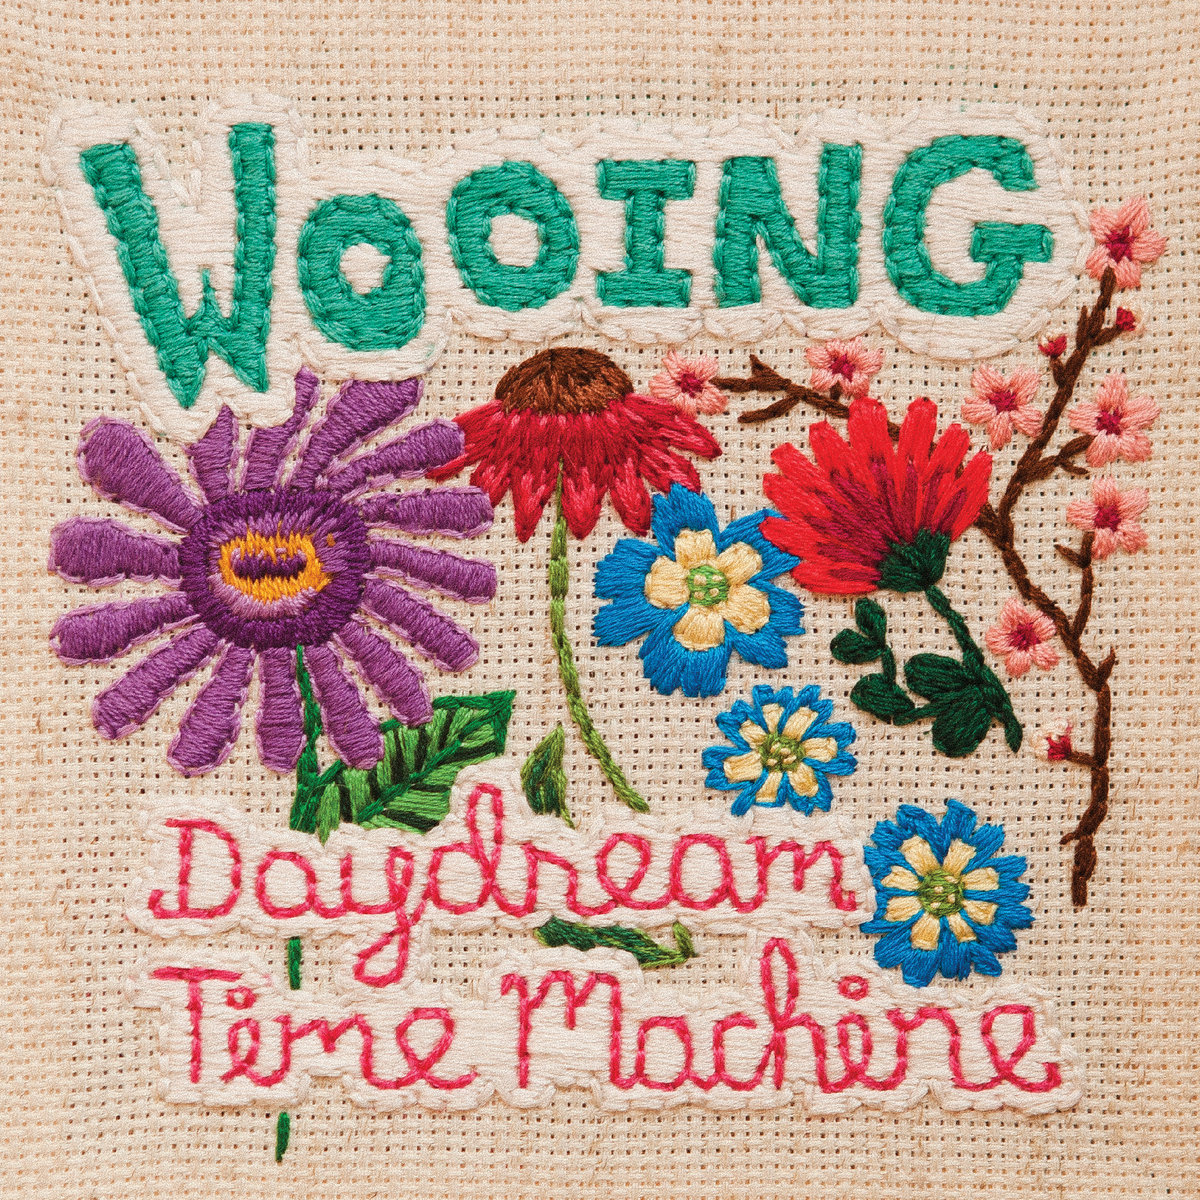 Wooing daydream time machine cover embroidered flowers